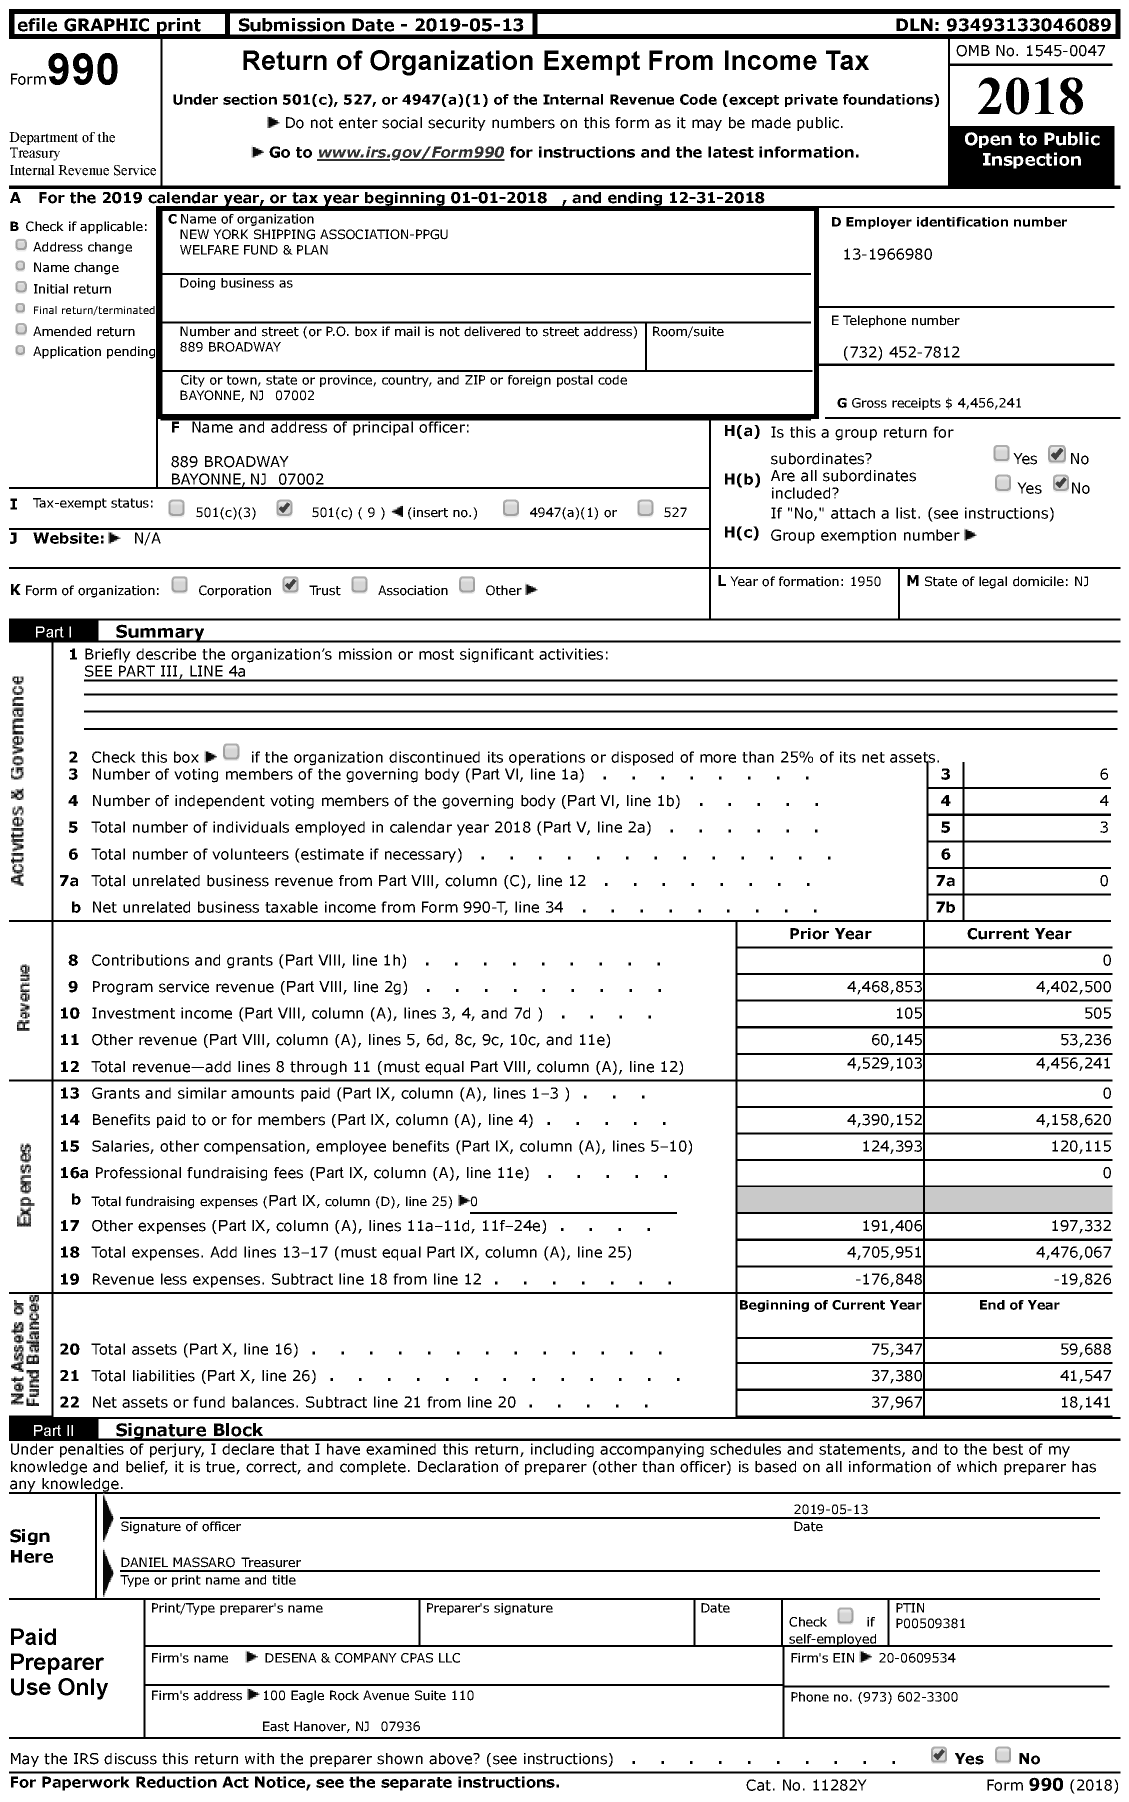 Image of first page of 2018 Form 990 for New York Shipping Association-Ppgu Welfare Fund and Plan